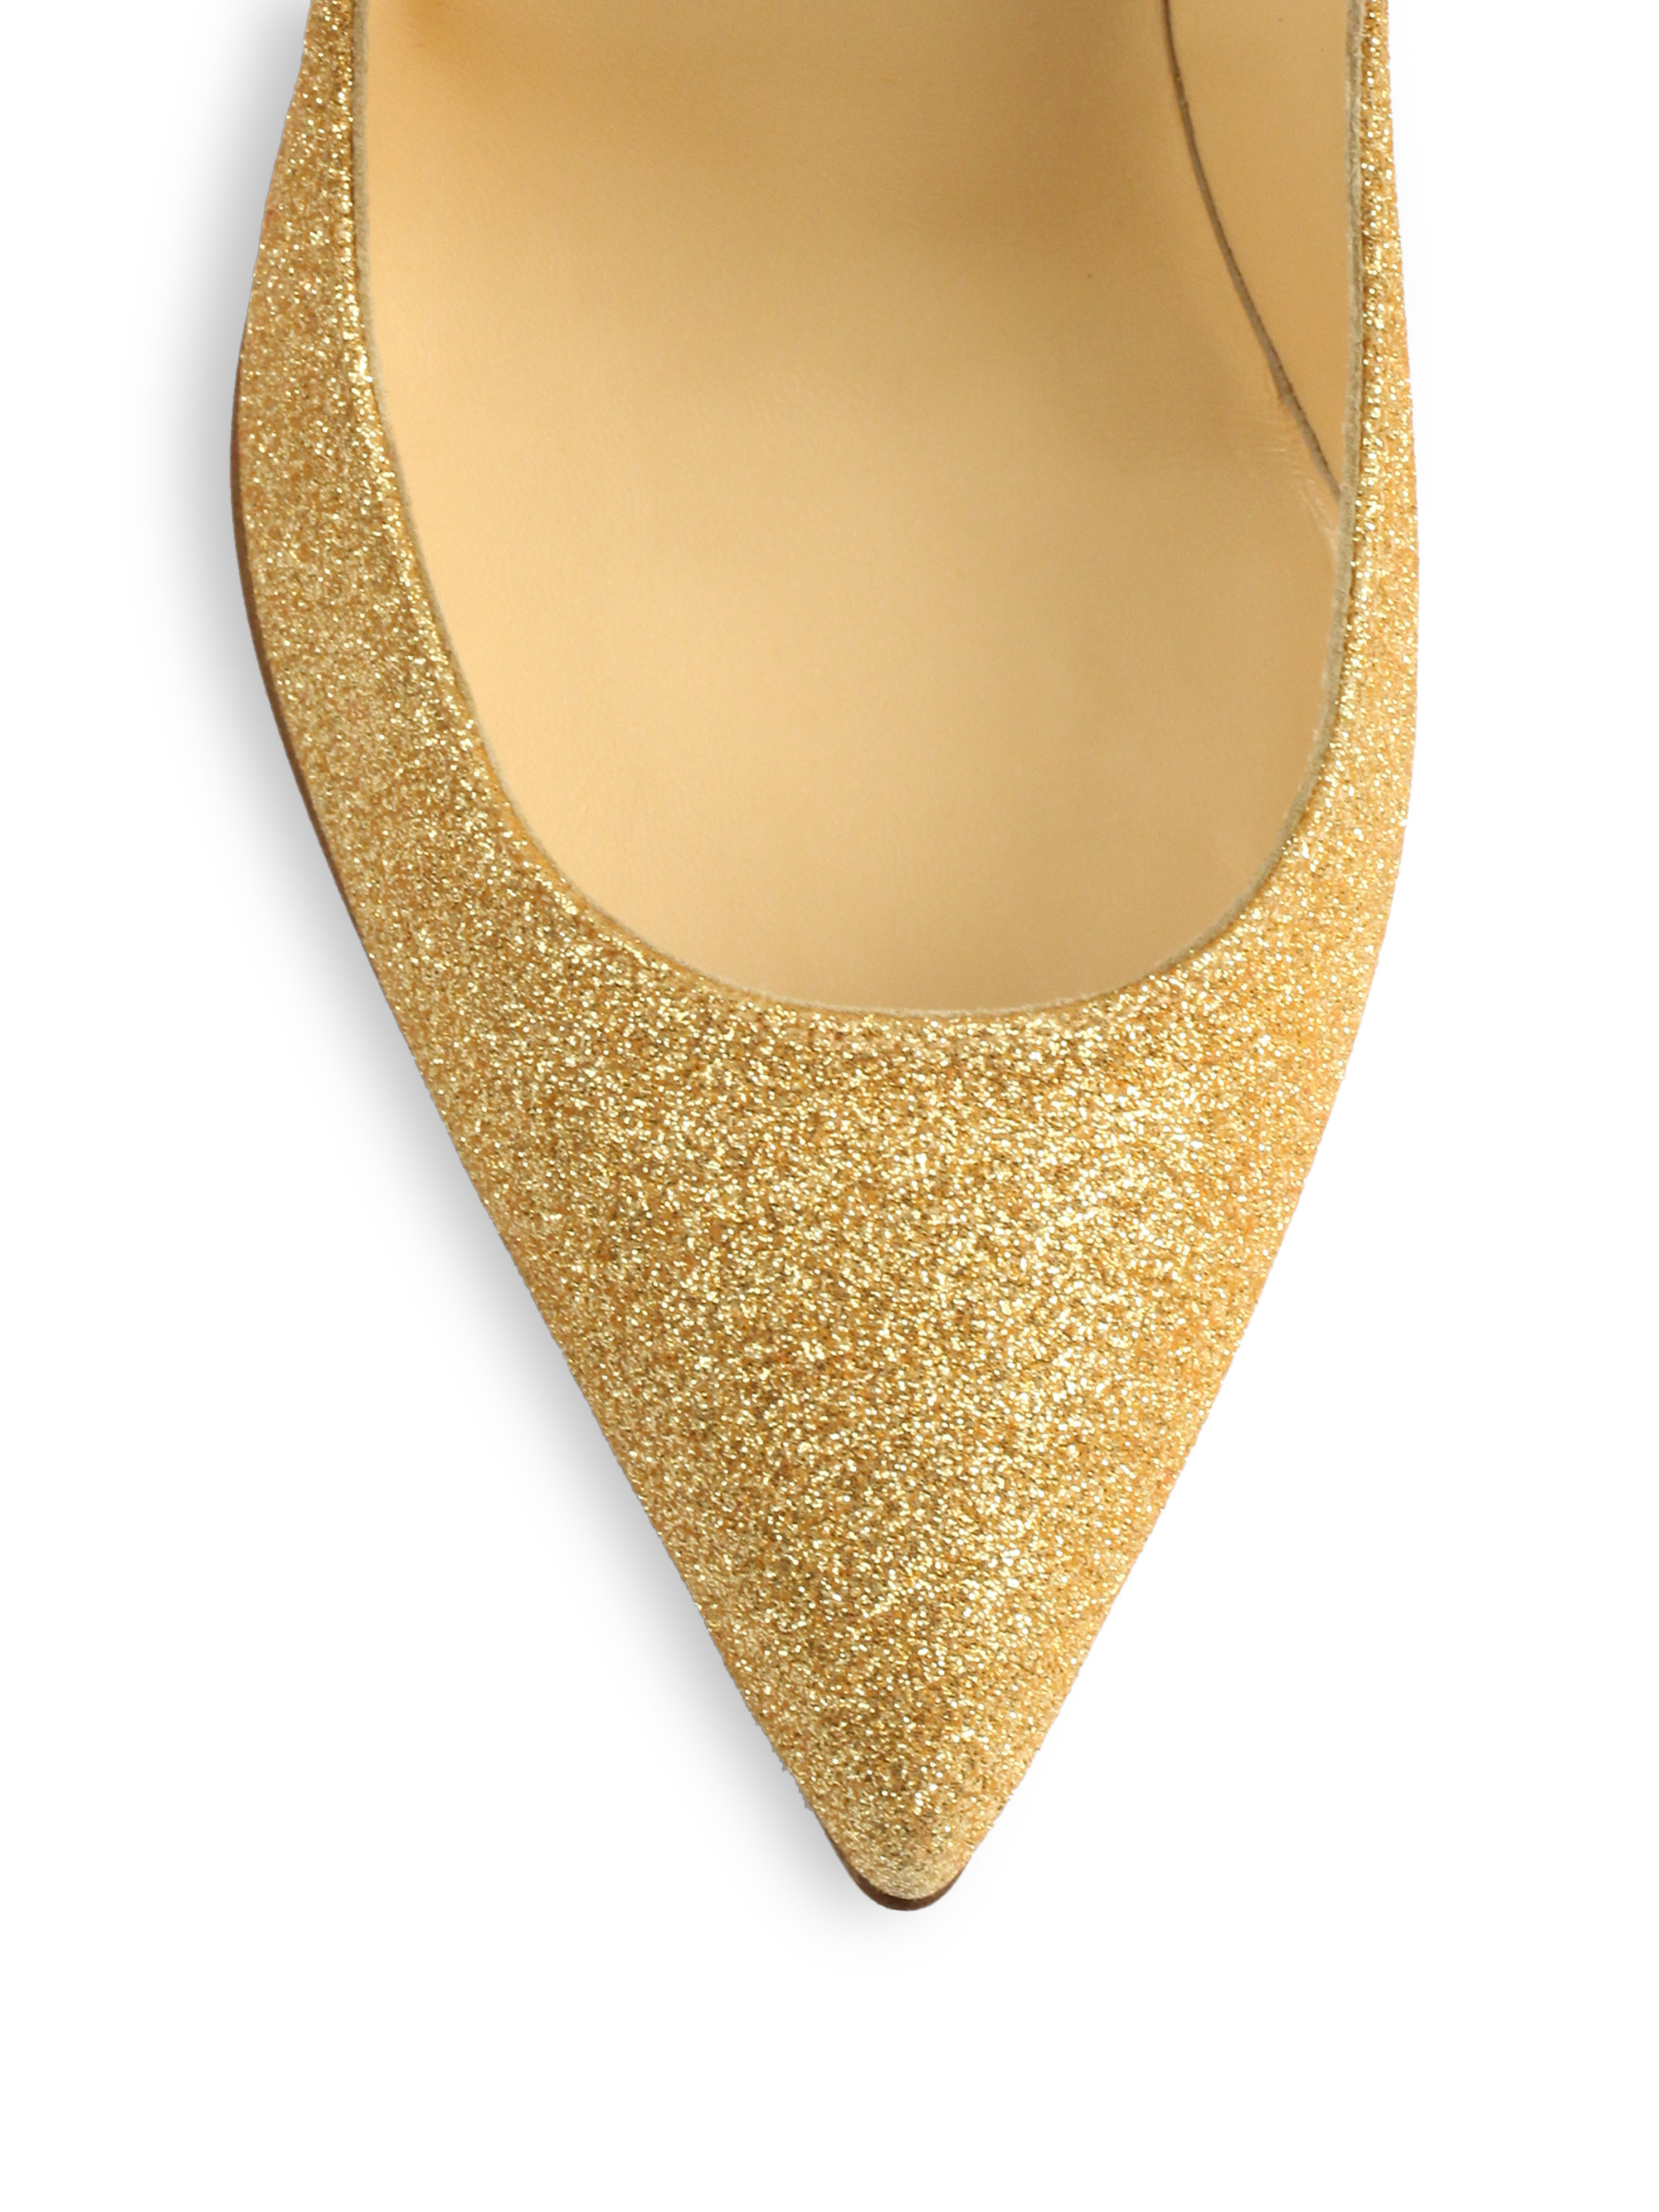 Christian louboutin Pigalle Glitter Pumps in Gold | Lyst  